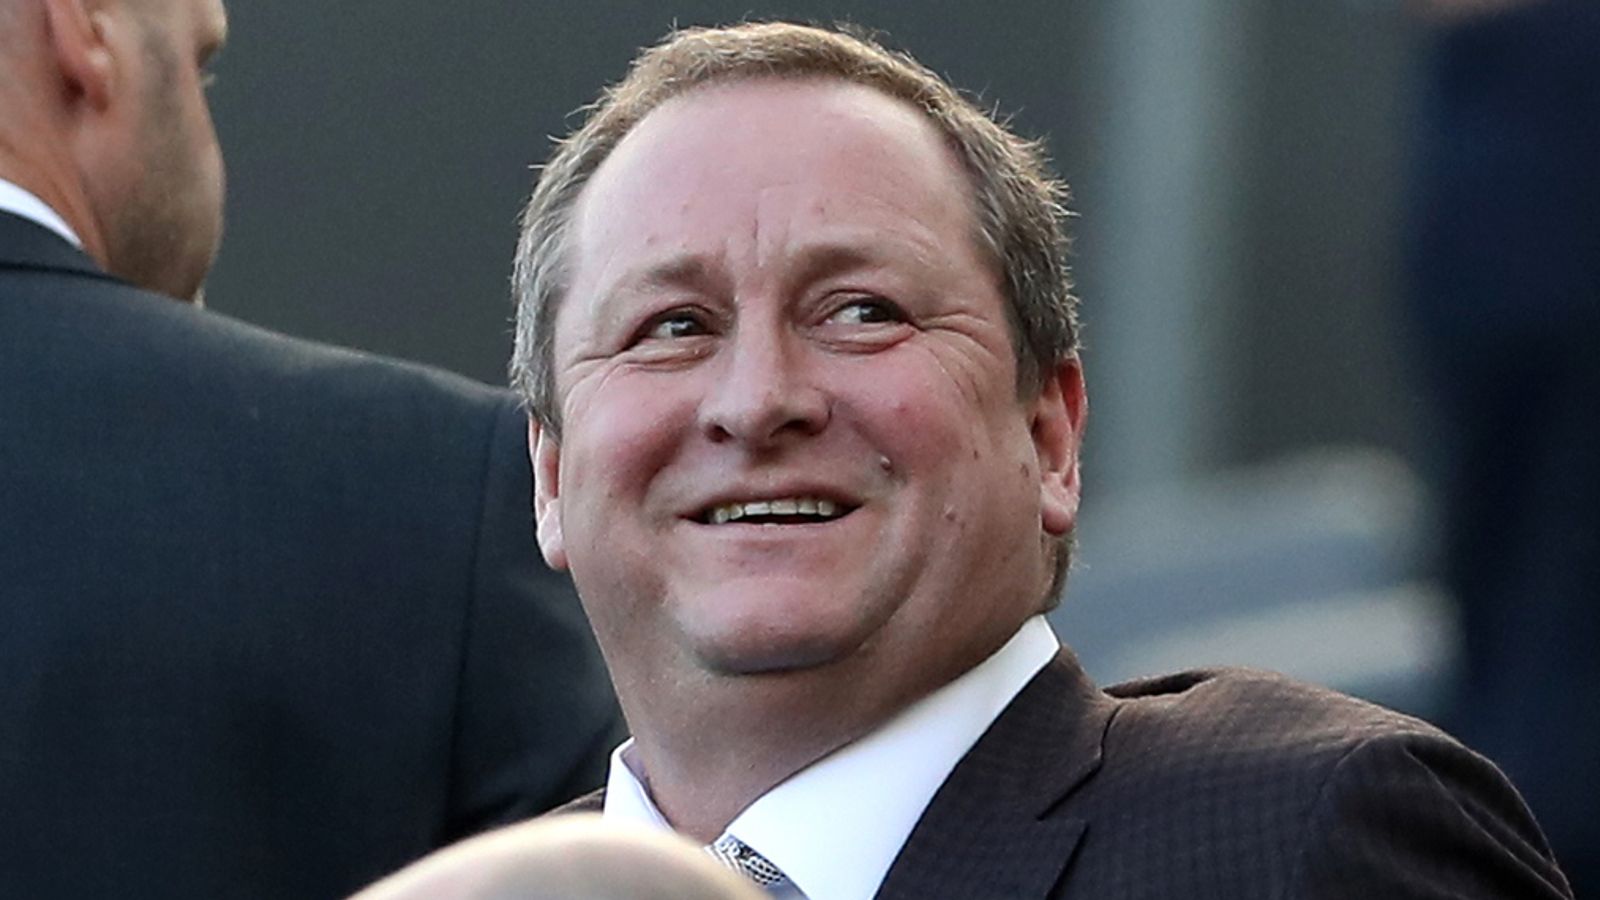 Derby County: Mike Ashley has not submitted a bid